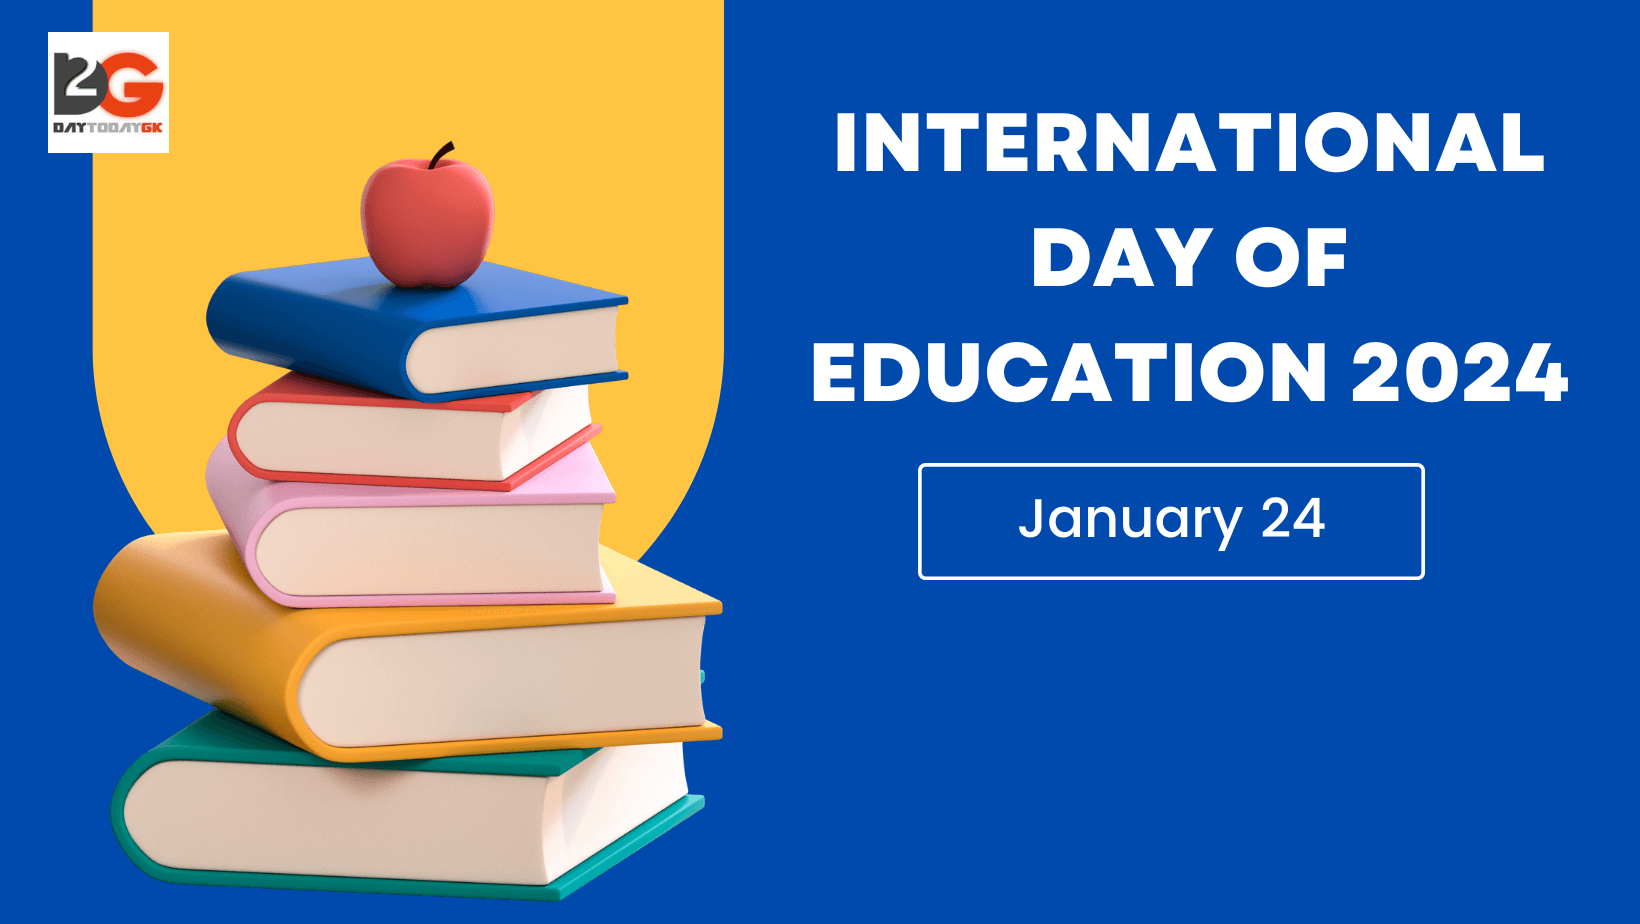 International Day of Education 2024 is observed on January 24